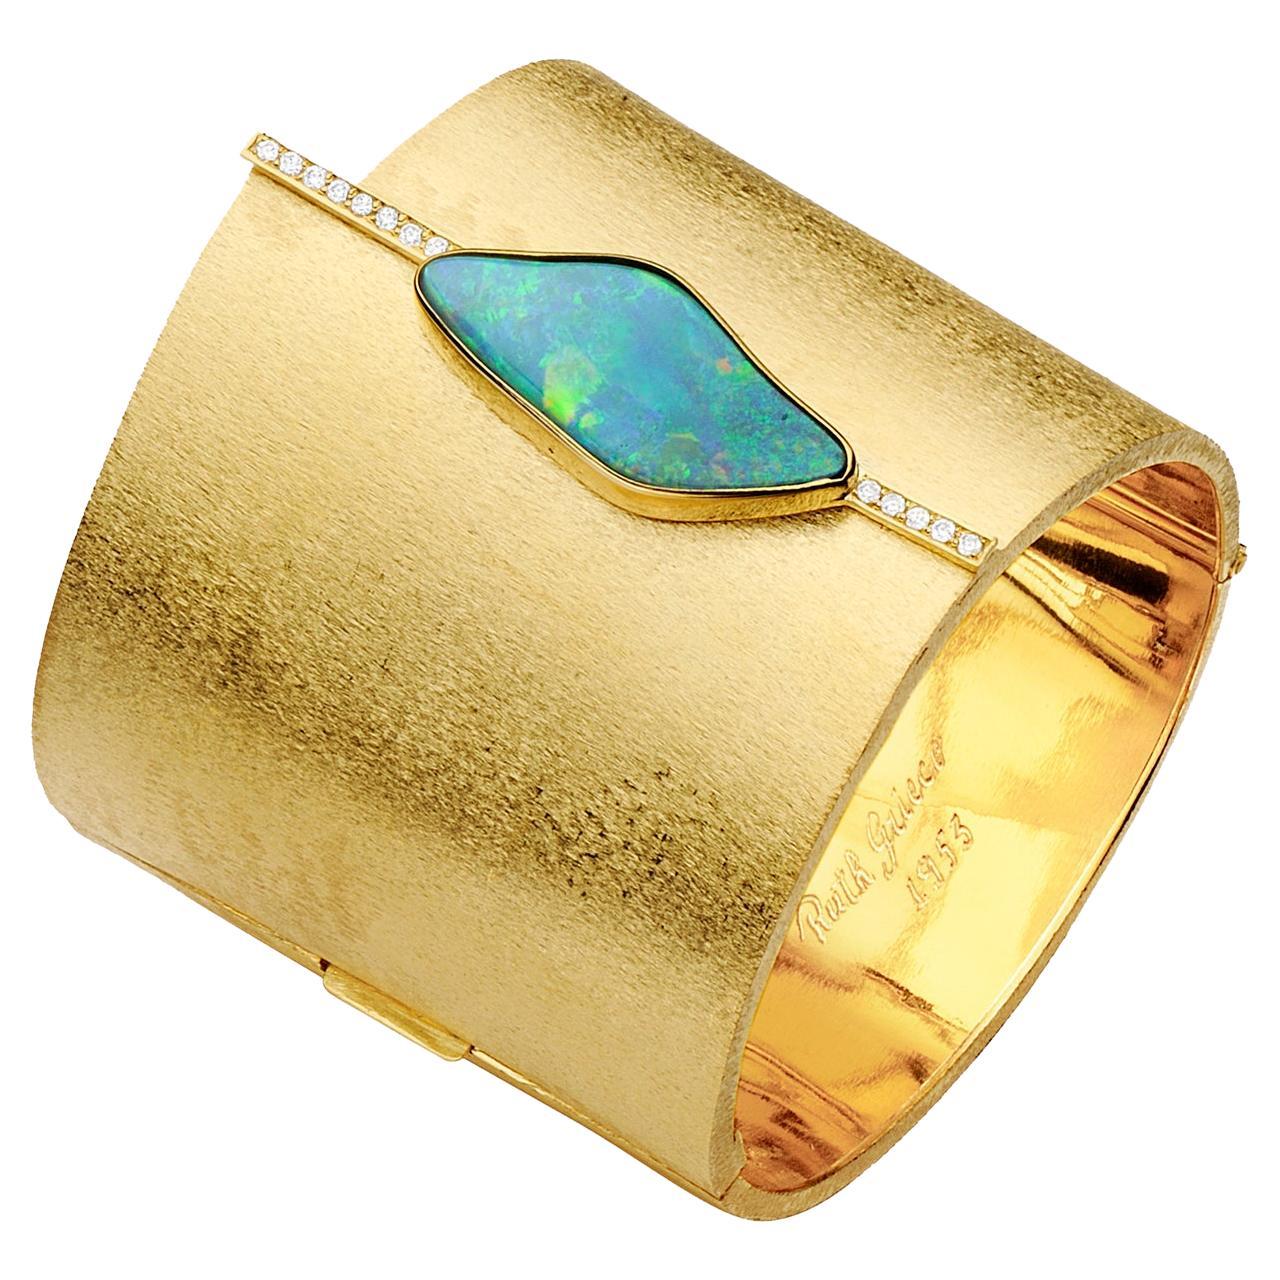 18K Yellow Gold Cuff Bracelet with Blue Opal Doublet and Diamonds by Ruth Grieco